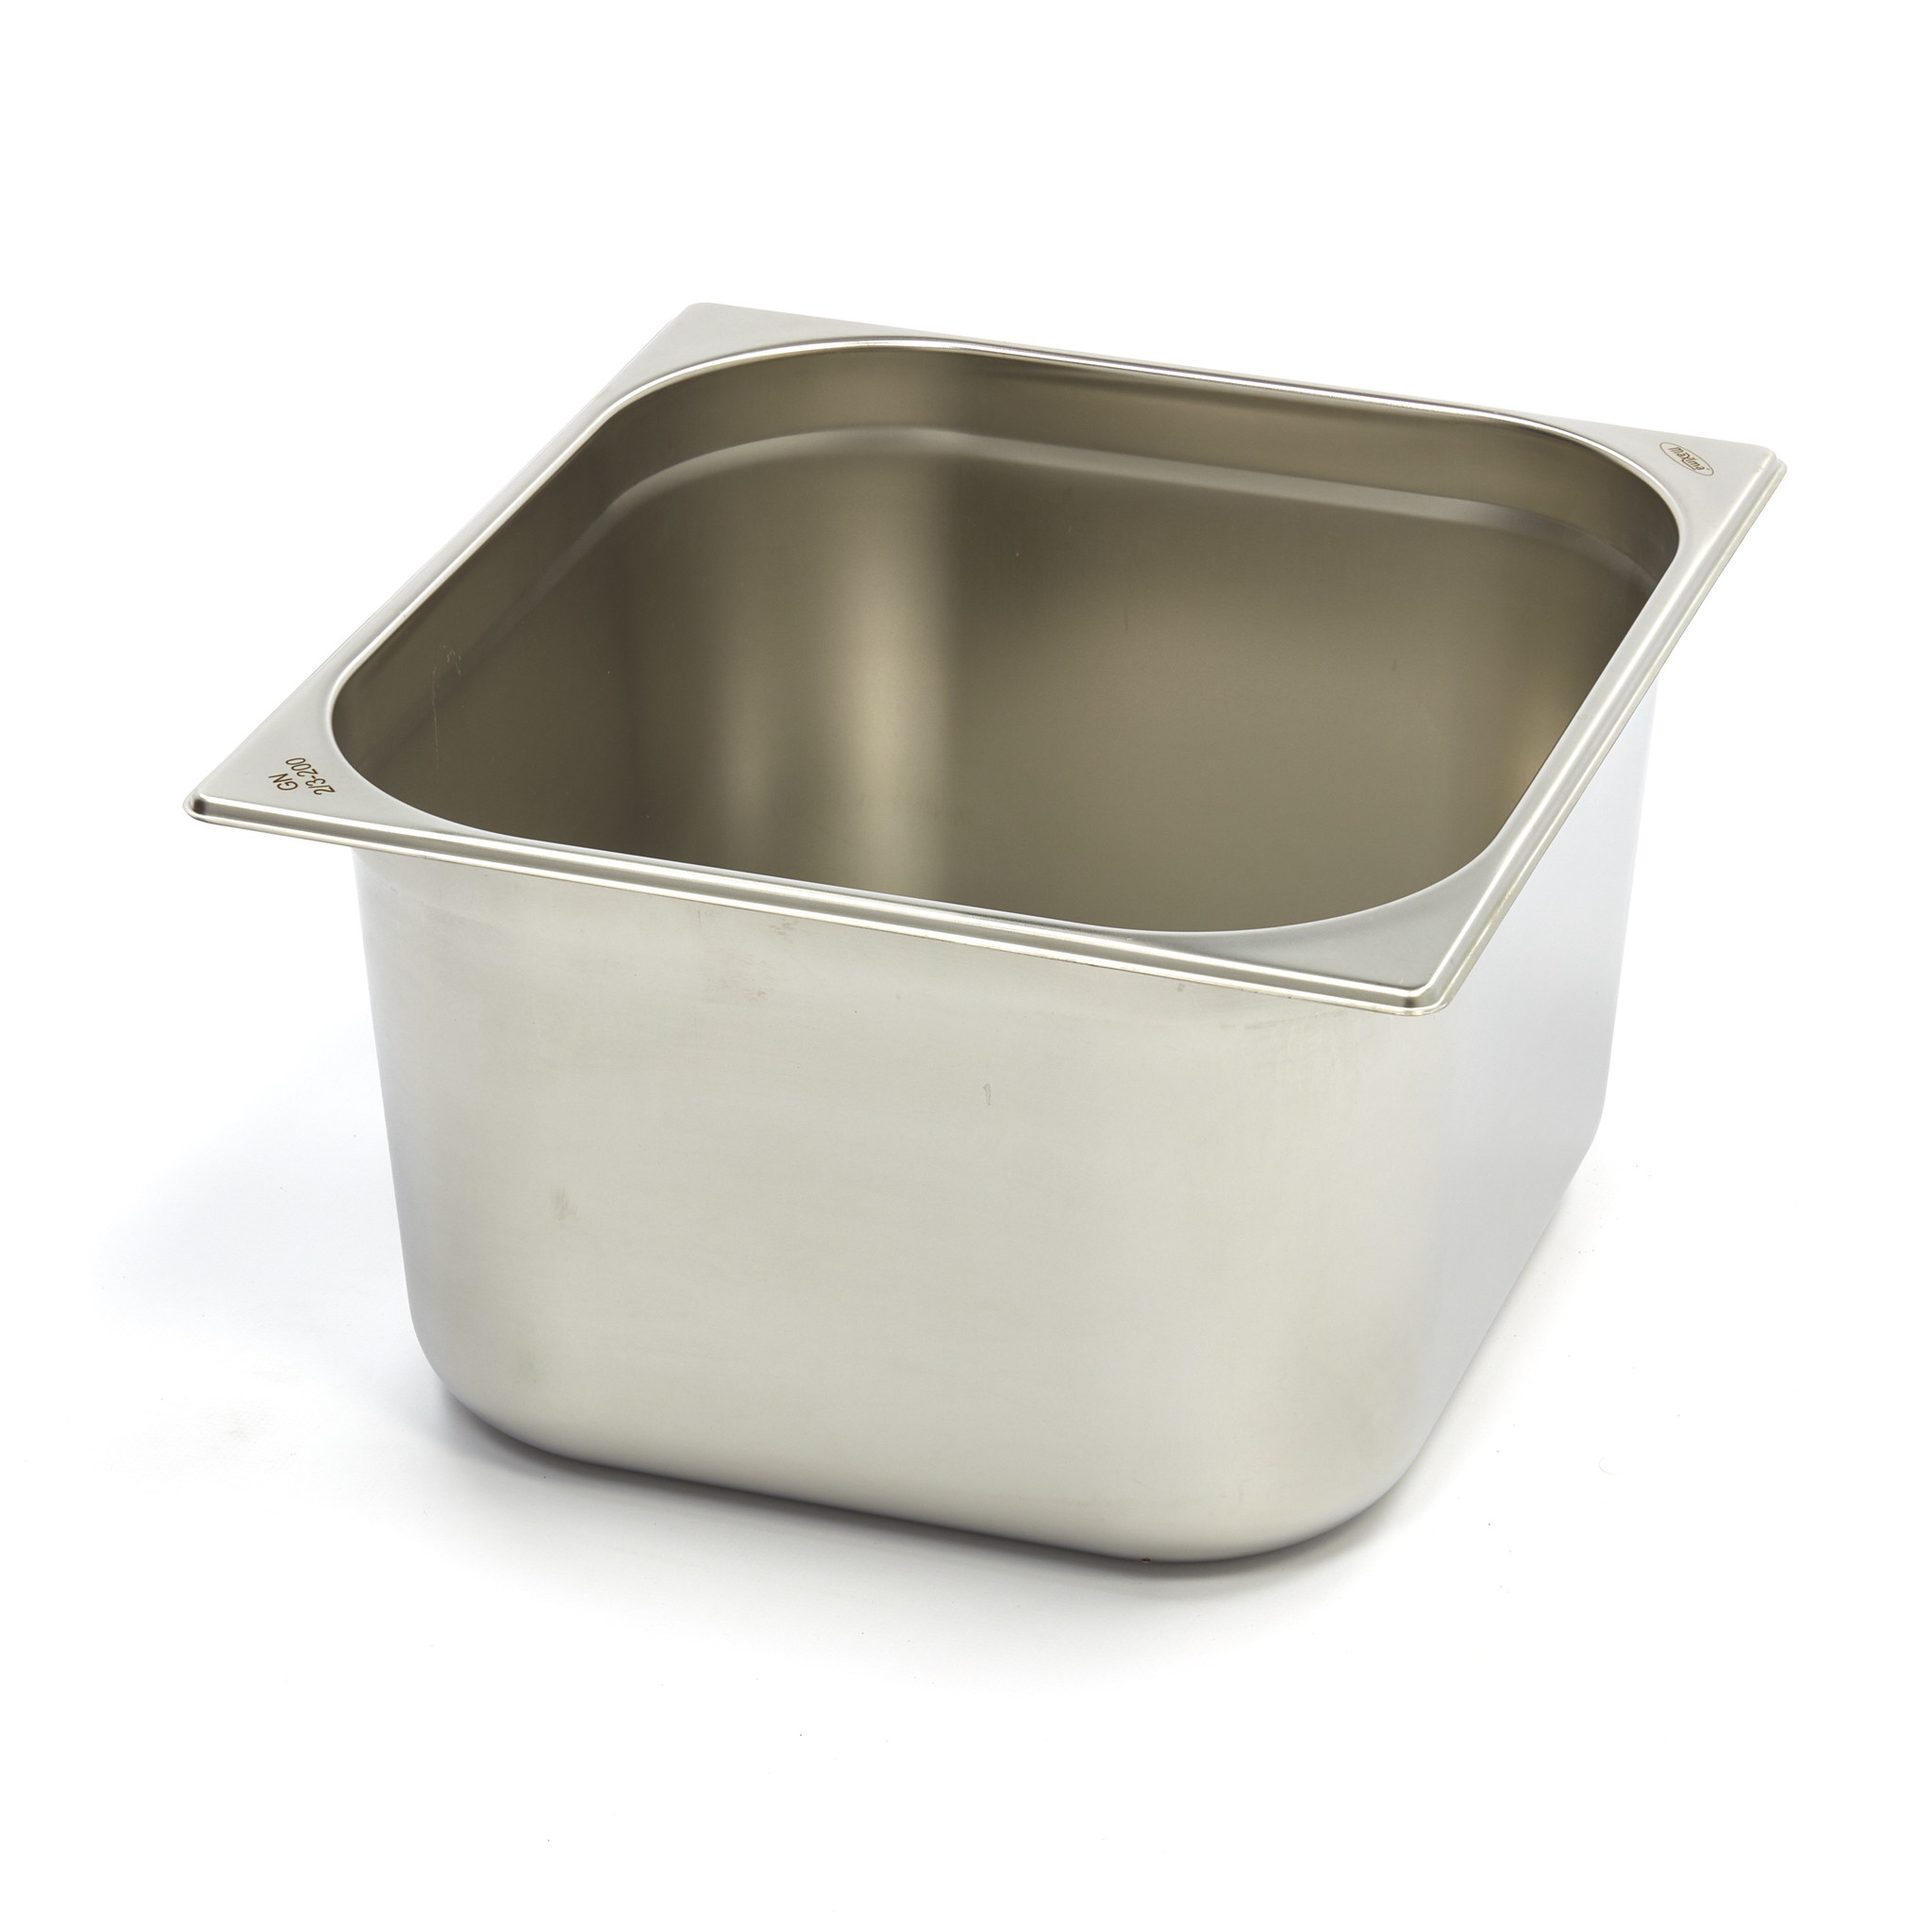 Maxima Stainless Steel Gastronorm Container 2 3gn 